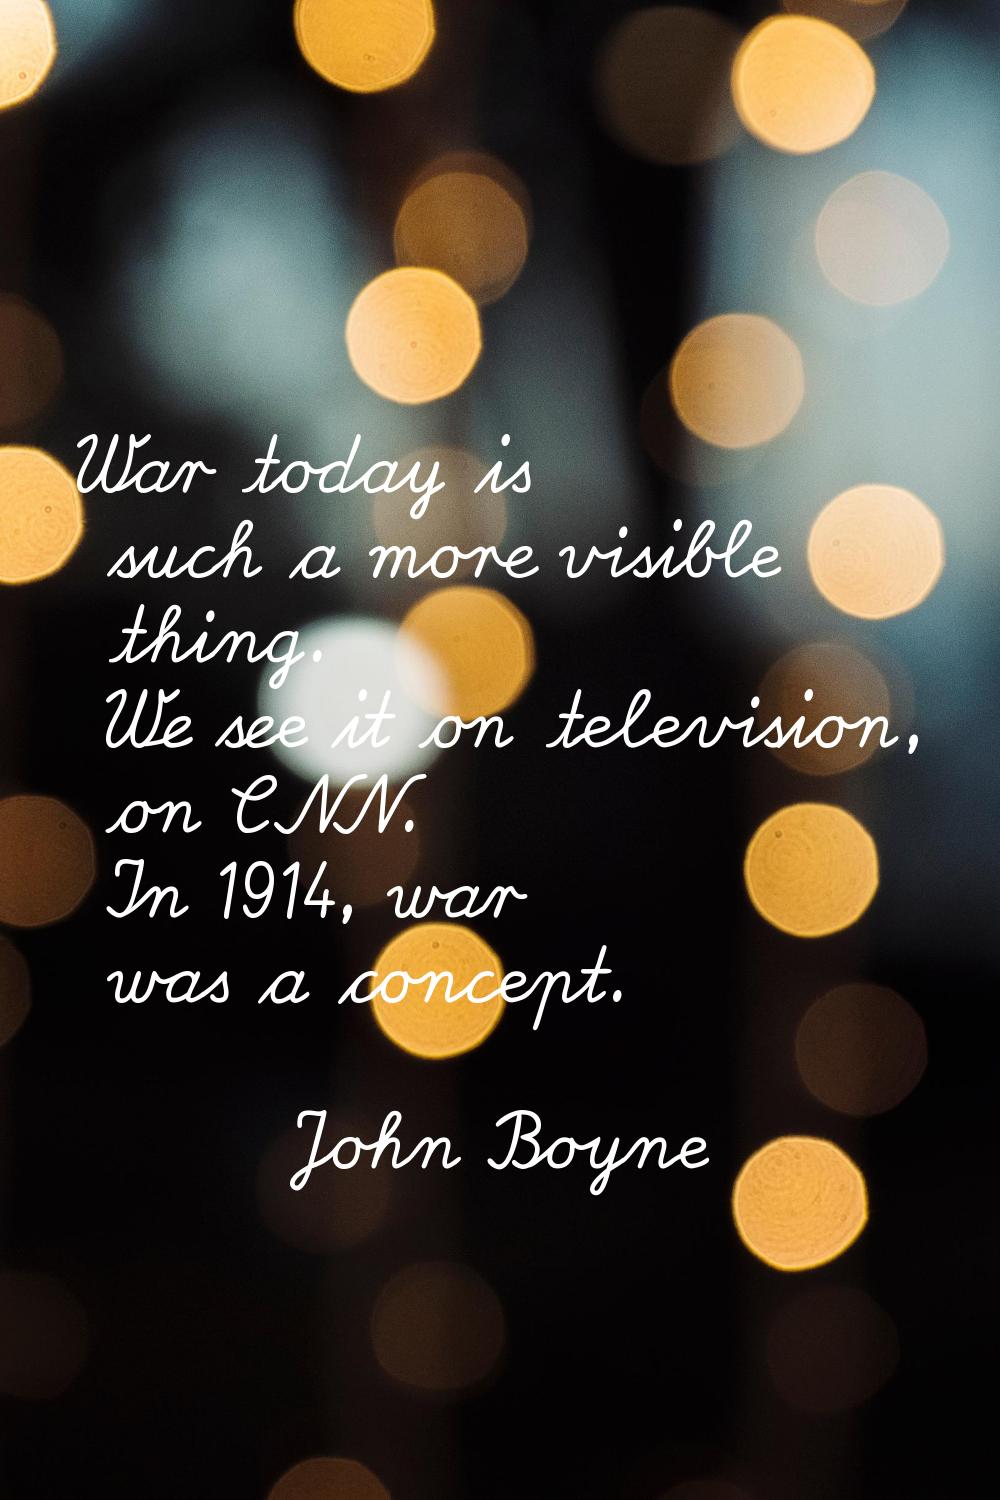 War today is such a more visible thing. We see it on television, on CNN. In 1914, war was a concept